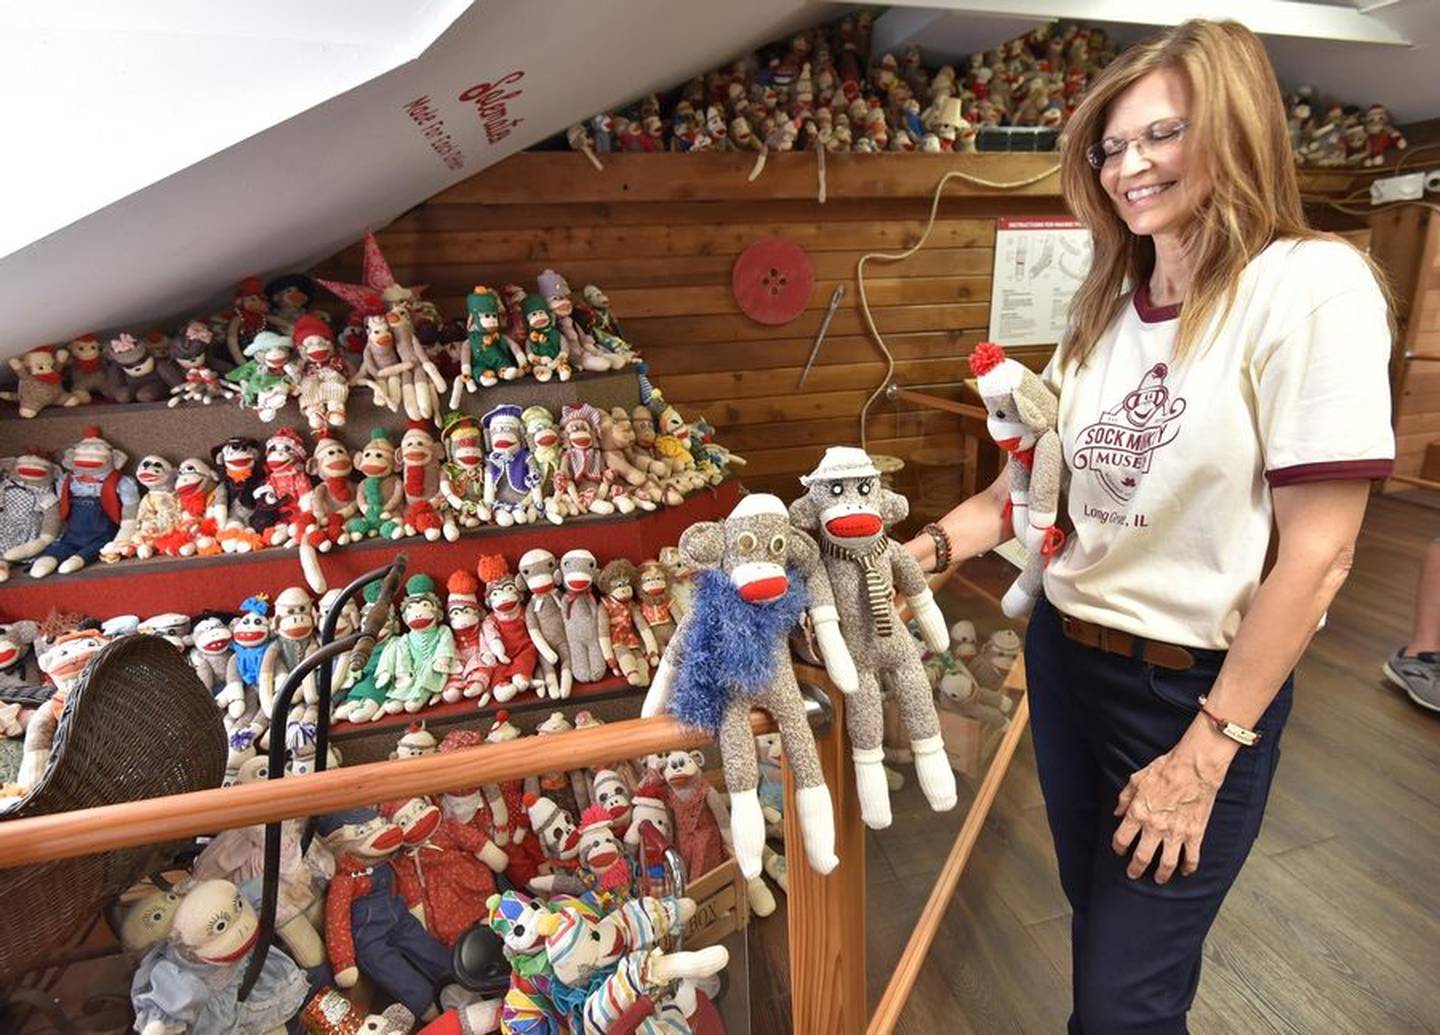 Sock Monkeys are counted by Guinness World Records representatives Chloe McCarthy, left, and Hannah Ortman at the Sock Monkey Museum in Long Grove on Thursday. The museum officially set the world record with 2,098 sock monkeys.